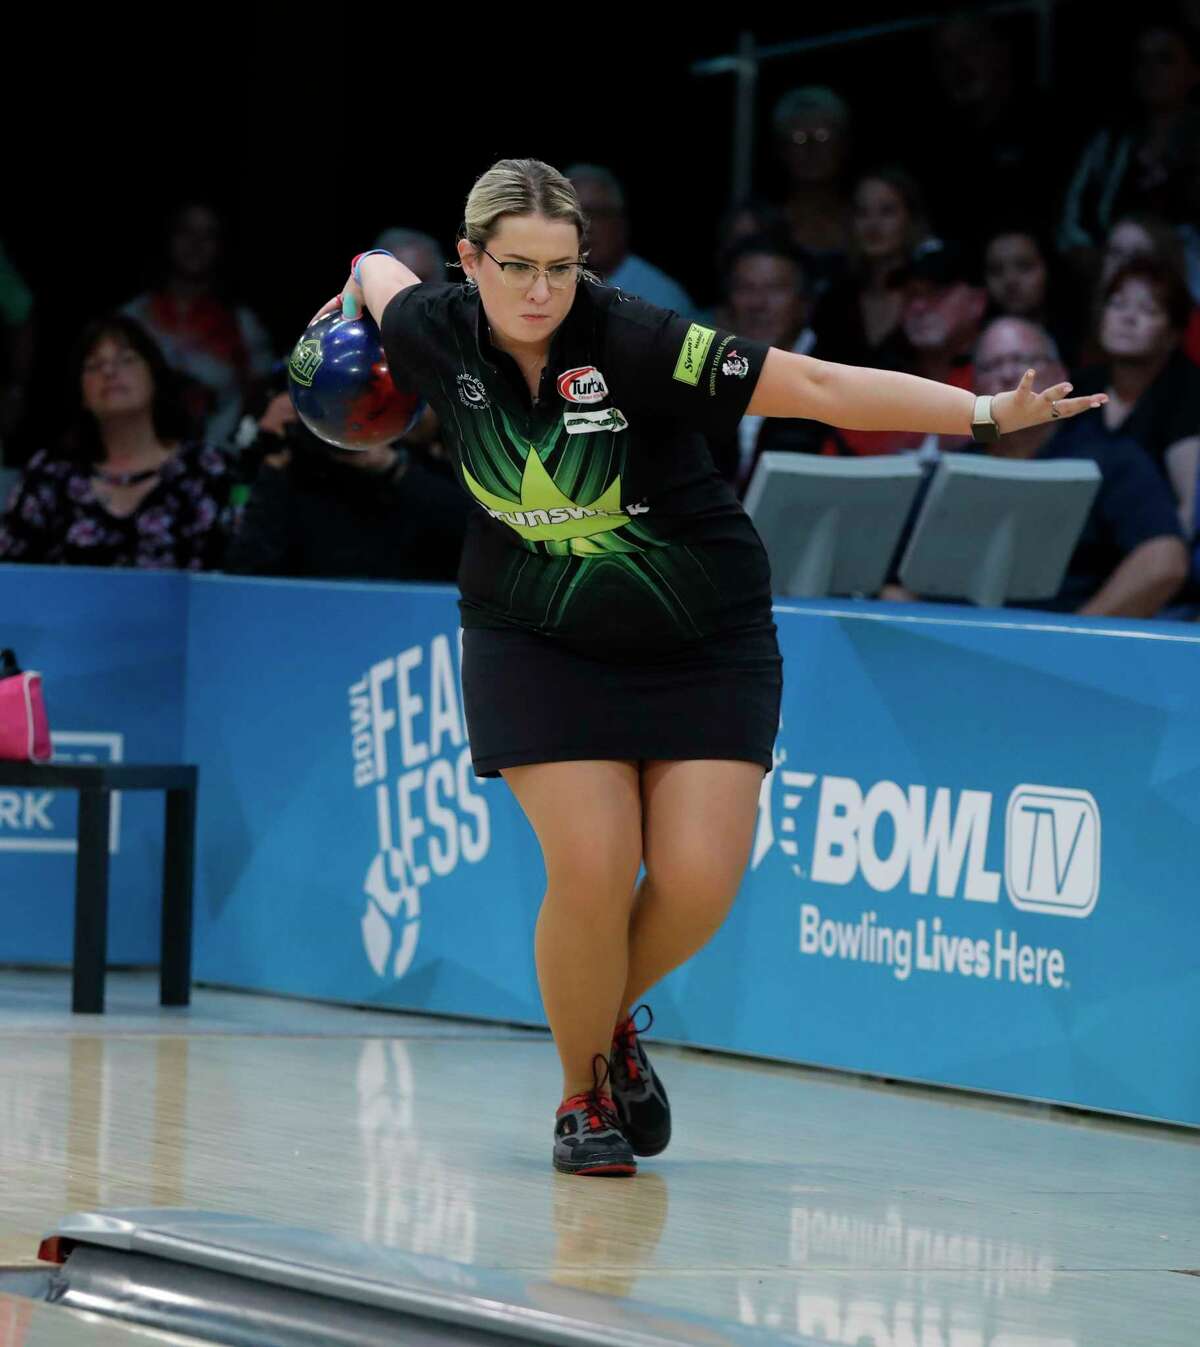 Liz Kuhlkin of Rotterdam, in action during the 2019 PWBA season, is bowling in her home area at this weekend's Albany Open.